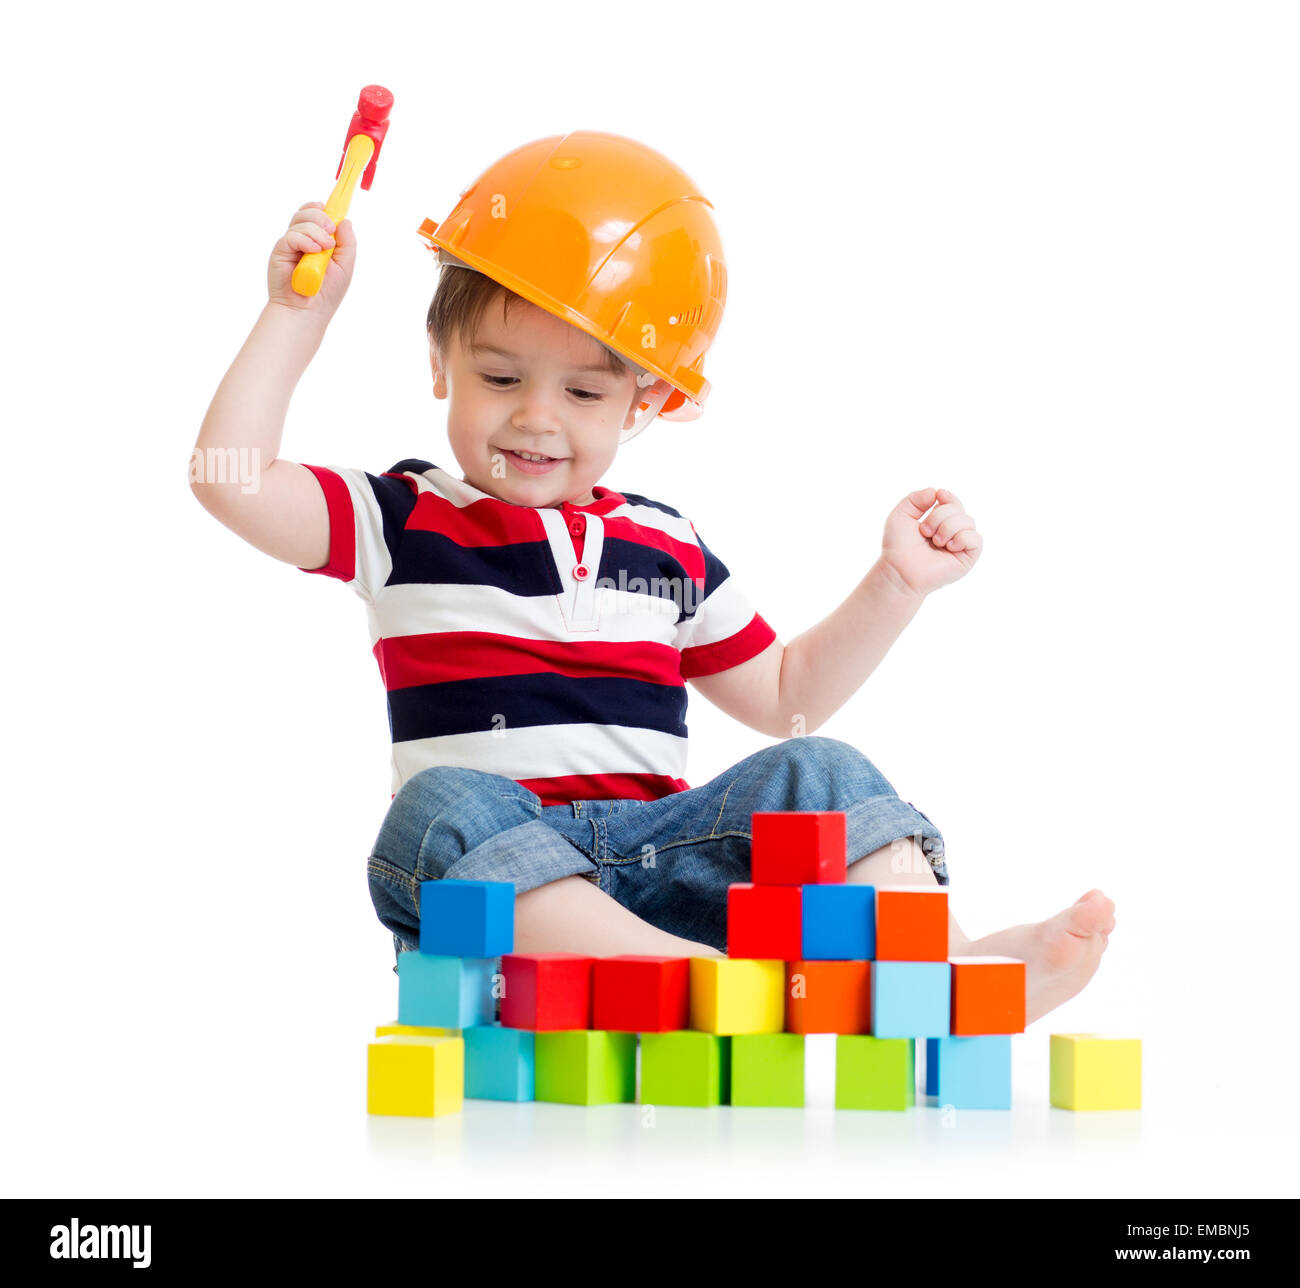 smiling child with hard hat and toy hammer Stock Photo